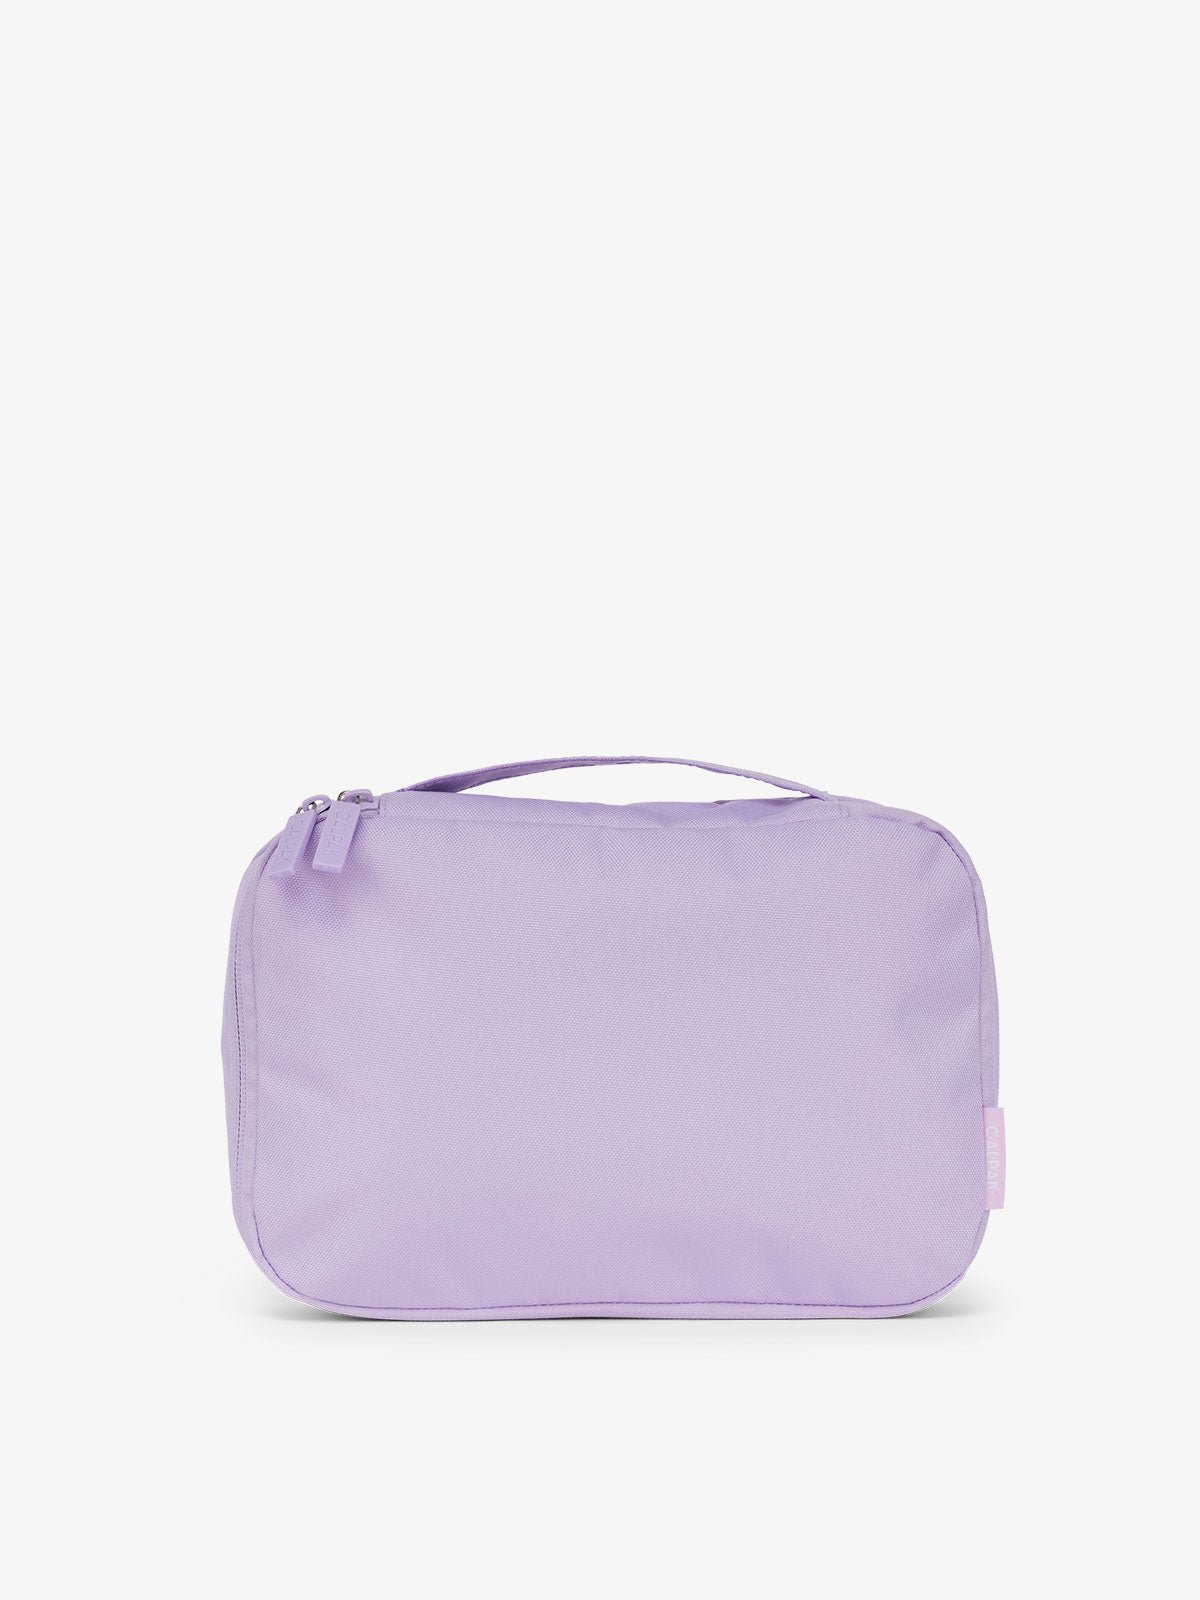 CALPAK small packing cubes with top handle in lavender orchid